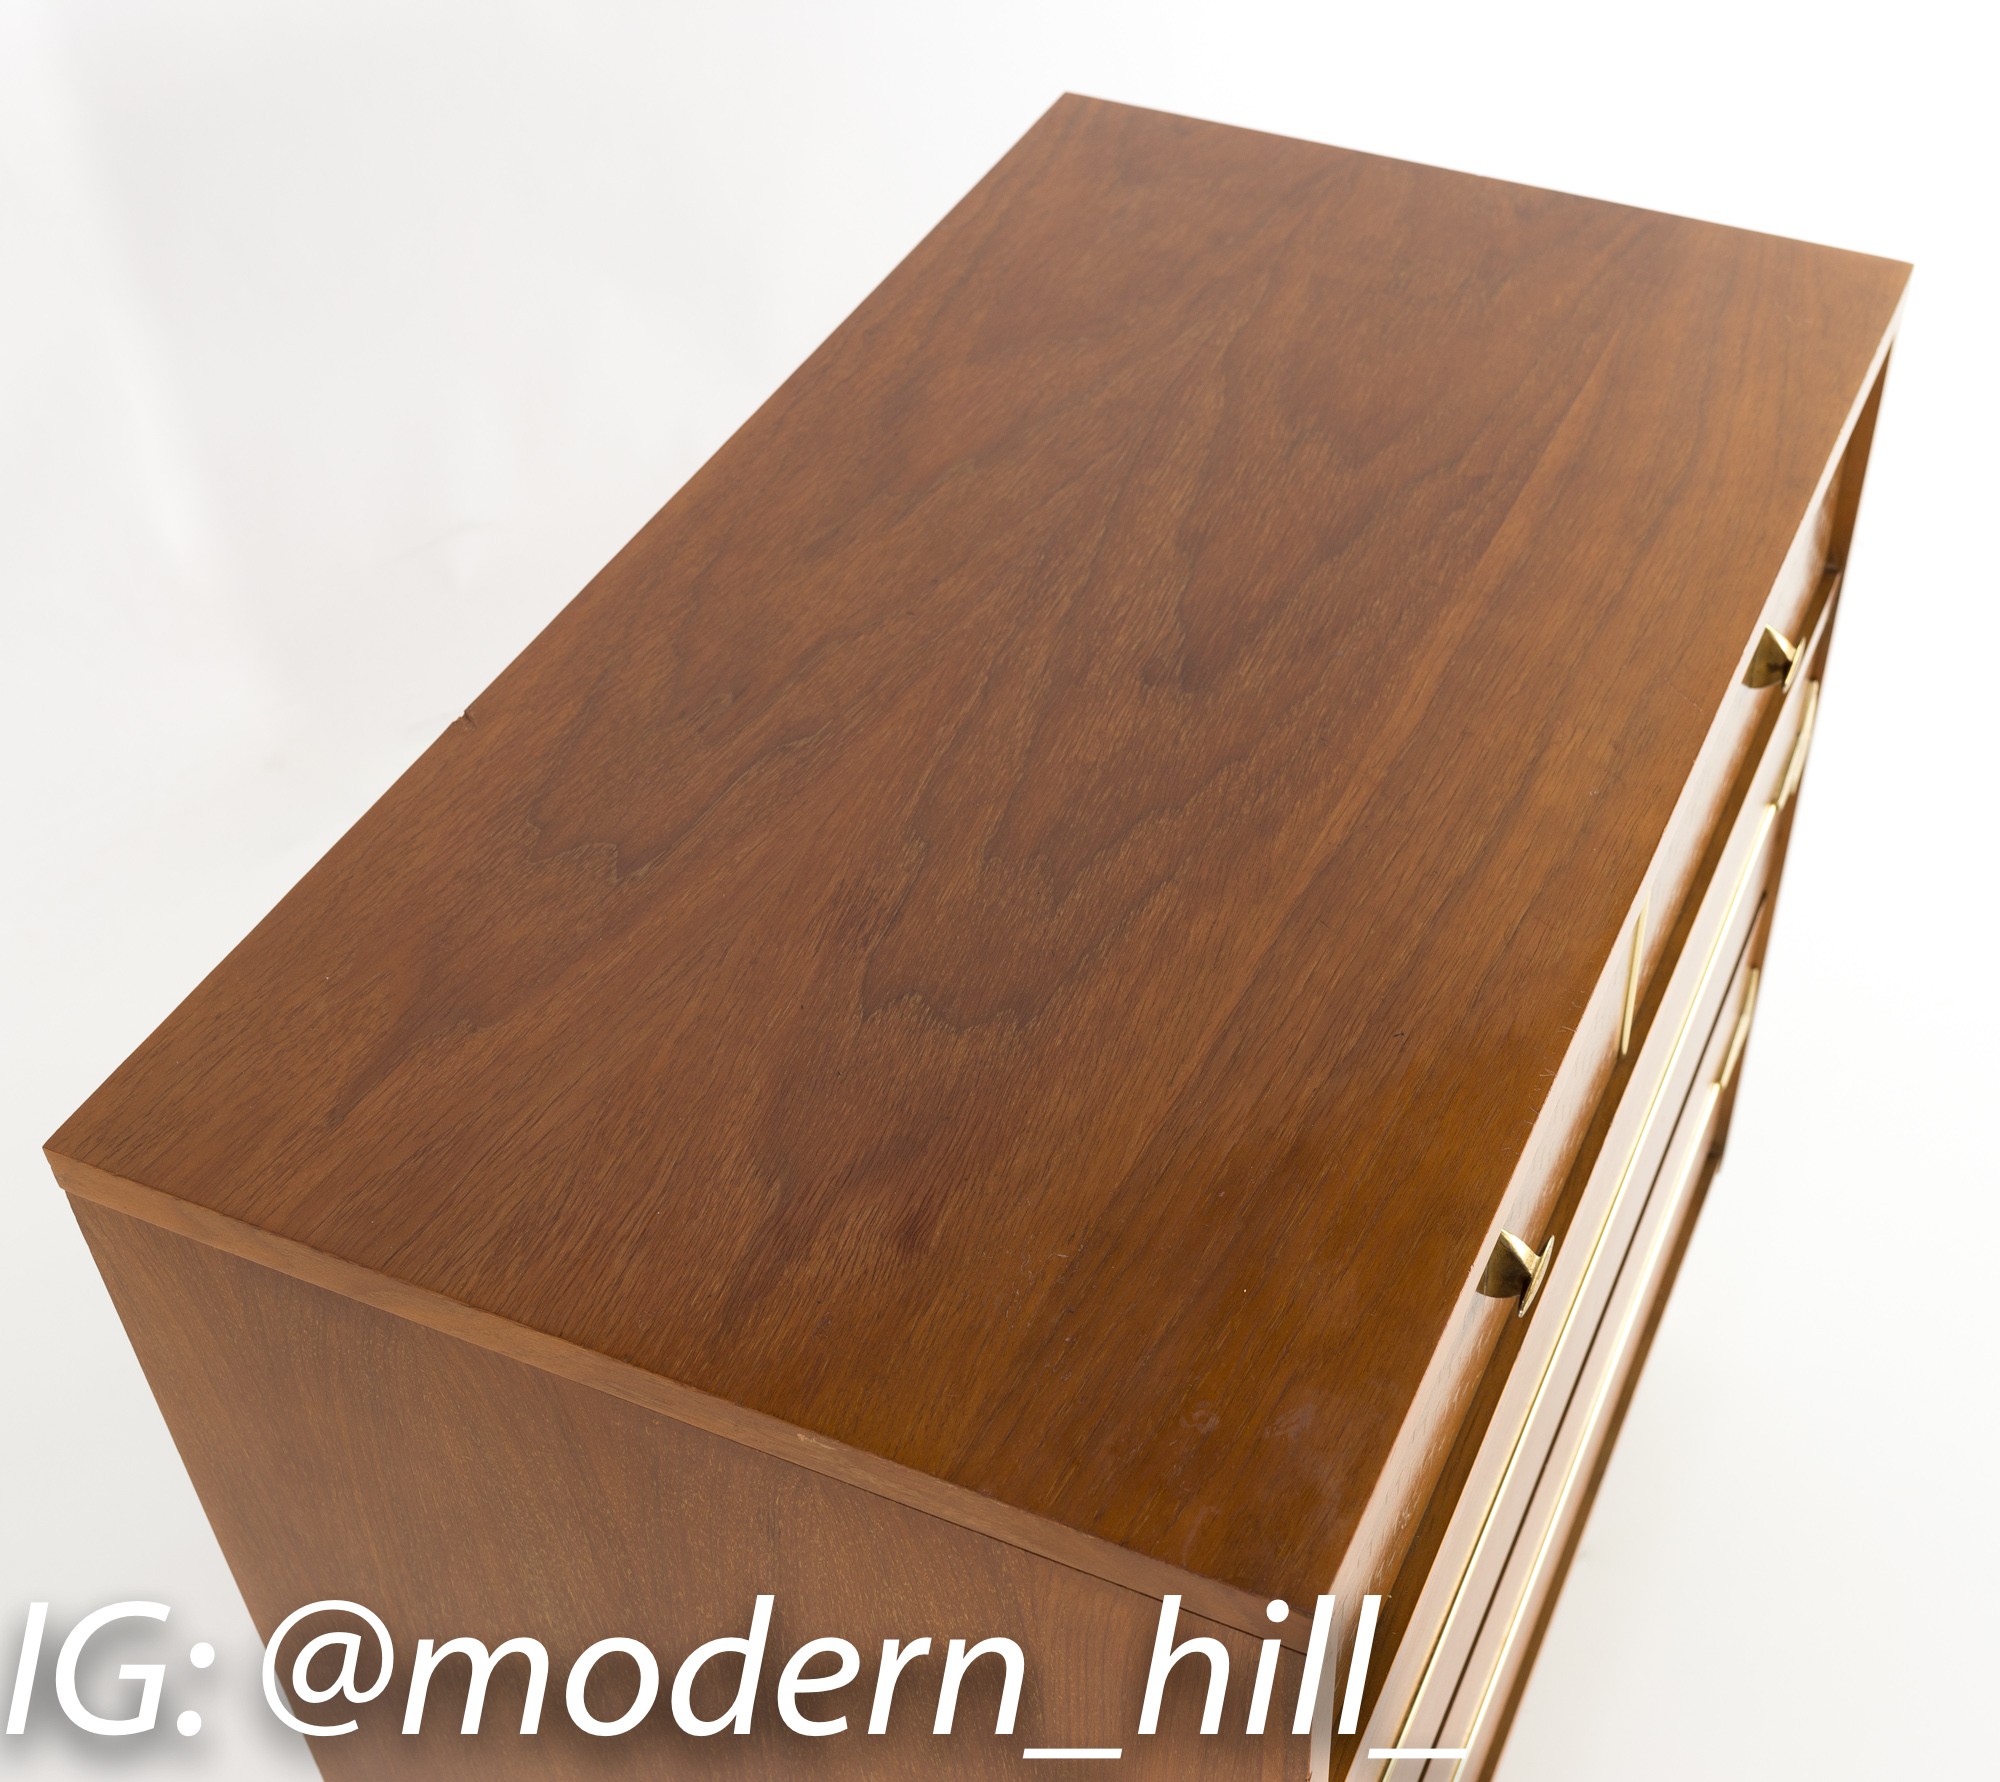 Kroehler Impression Mid Century Walnut and Brass Large Night Stands Chest of Drawers - Matching Pair